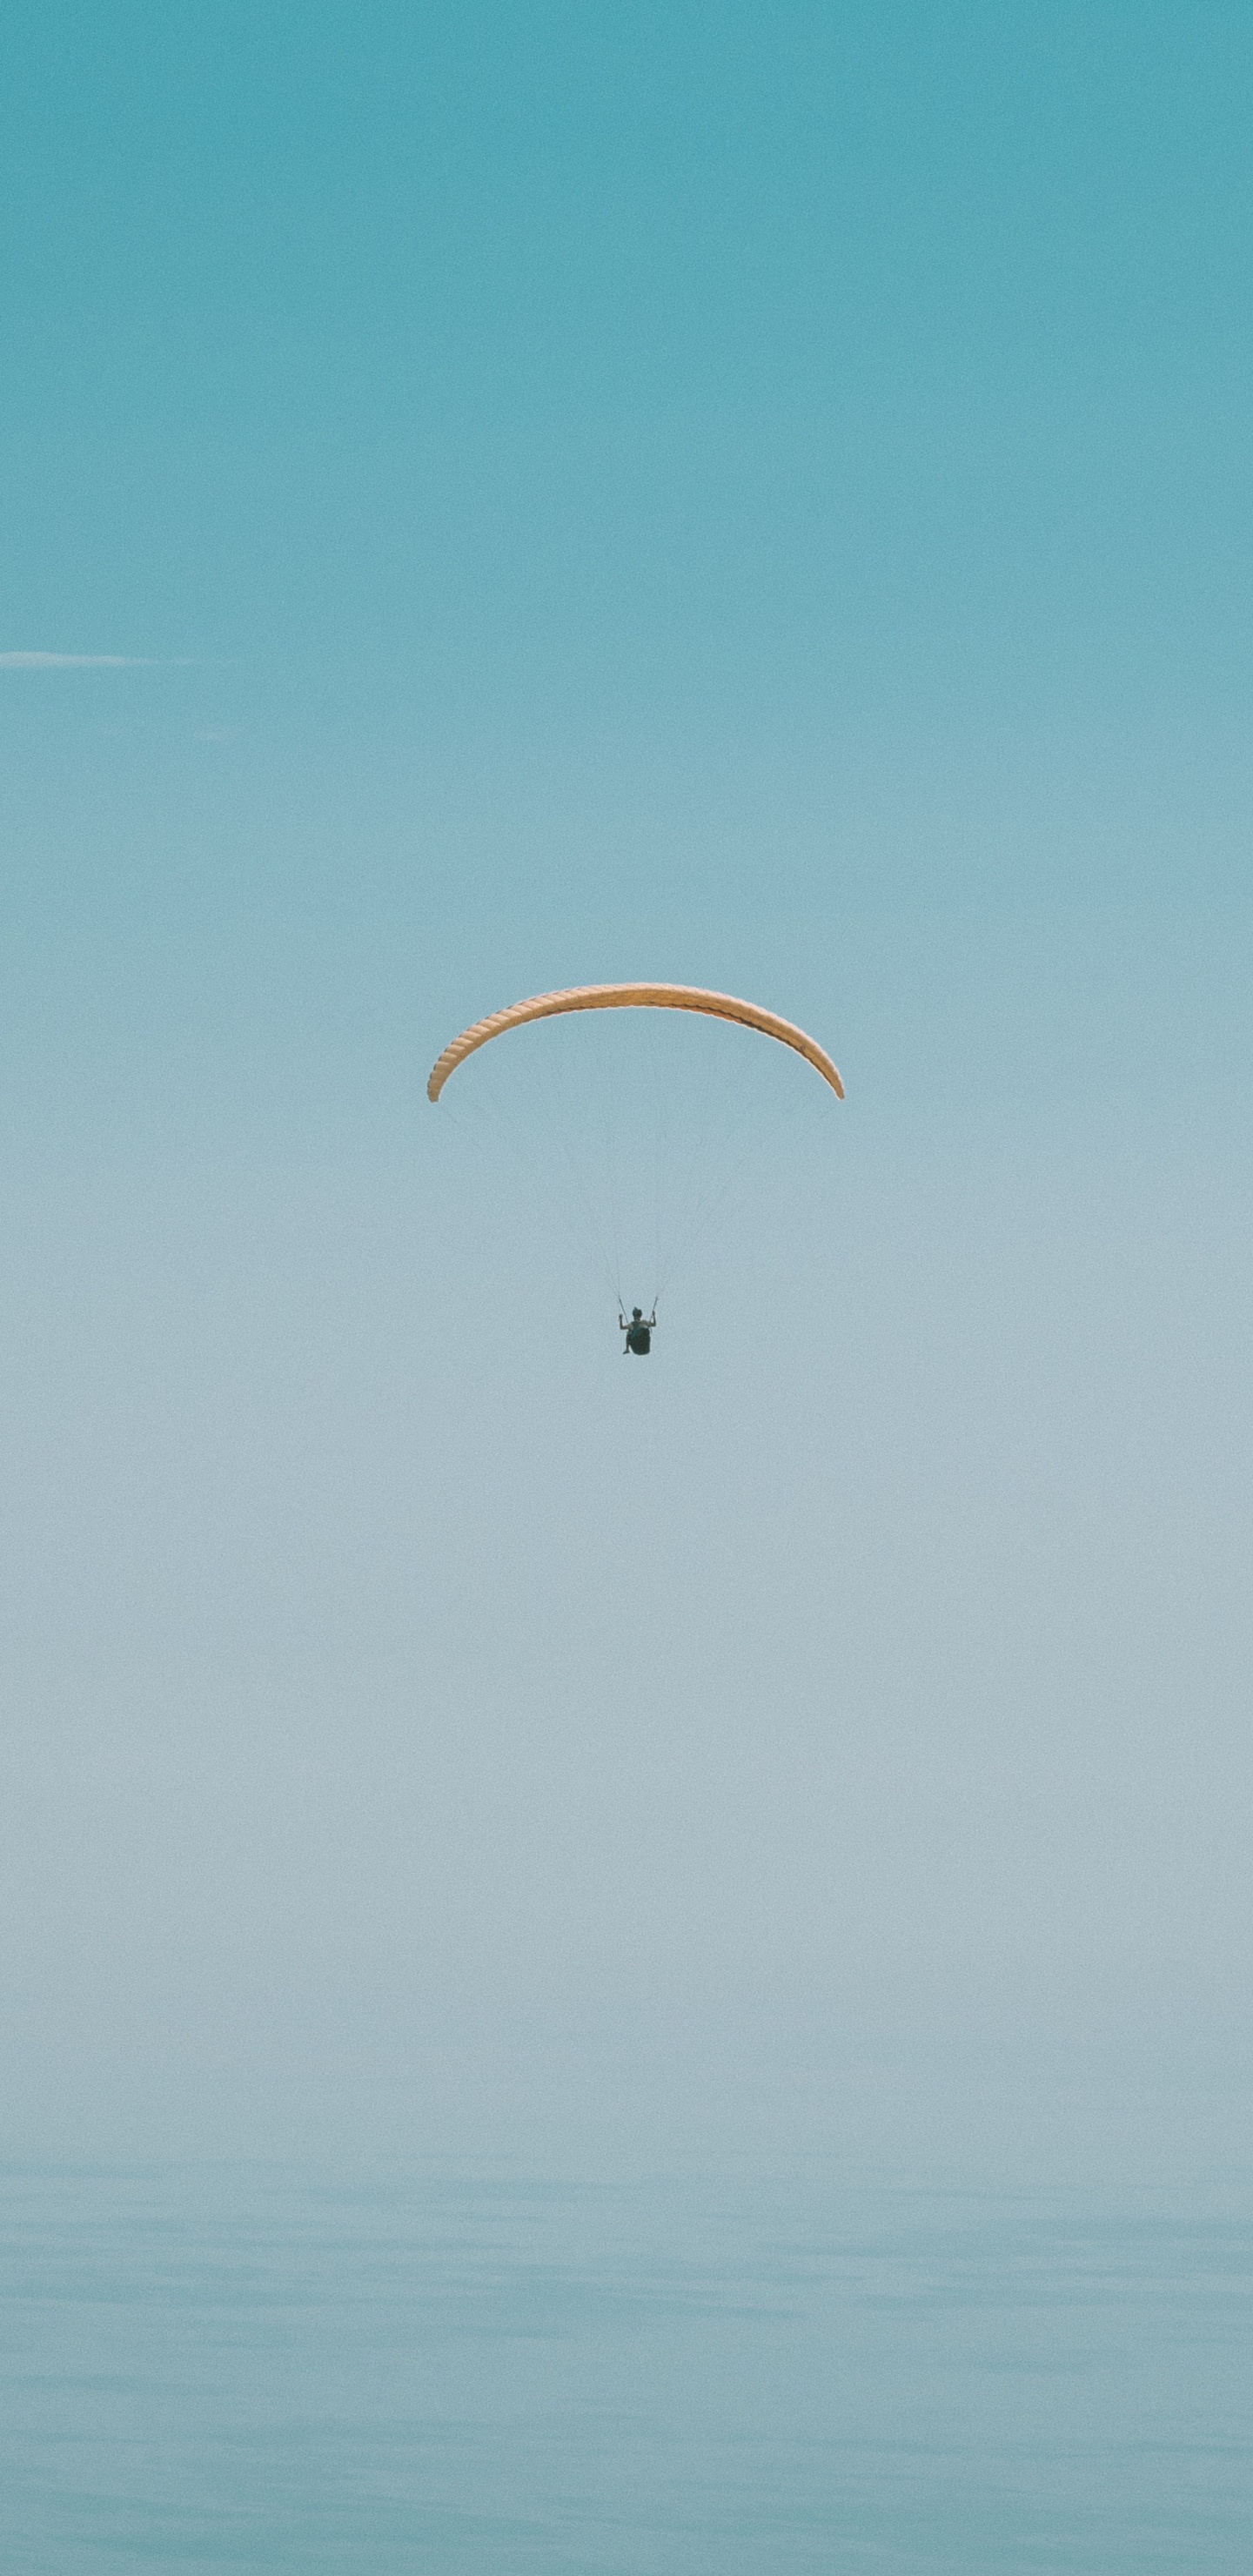 Person in Parachute Under Blue Sky During Daytime. Wallpaper in 1440x2960 Resolution